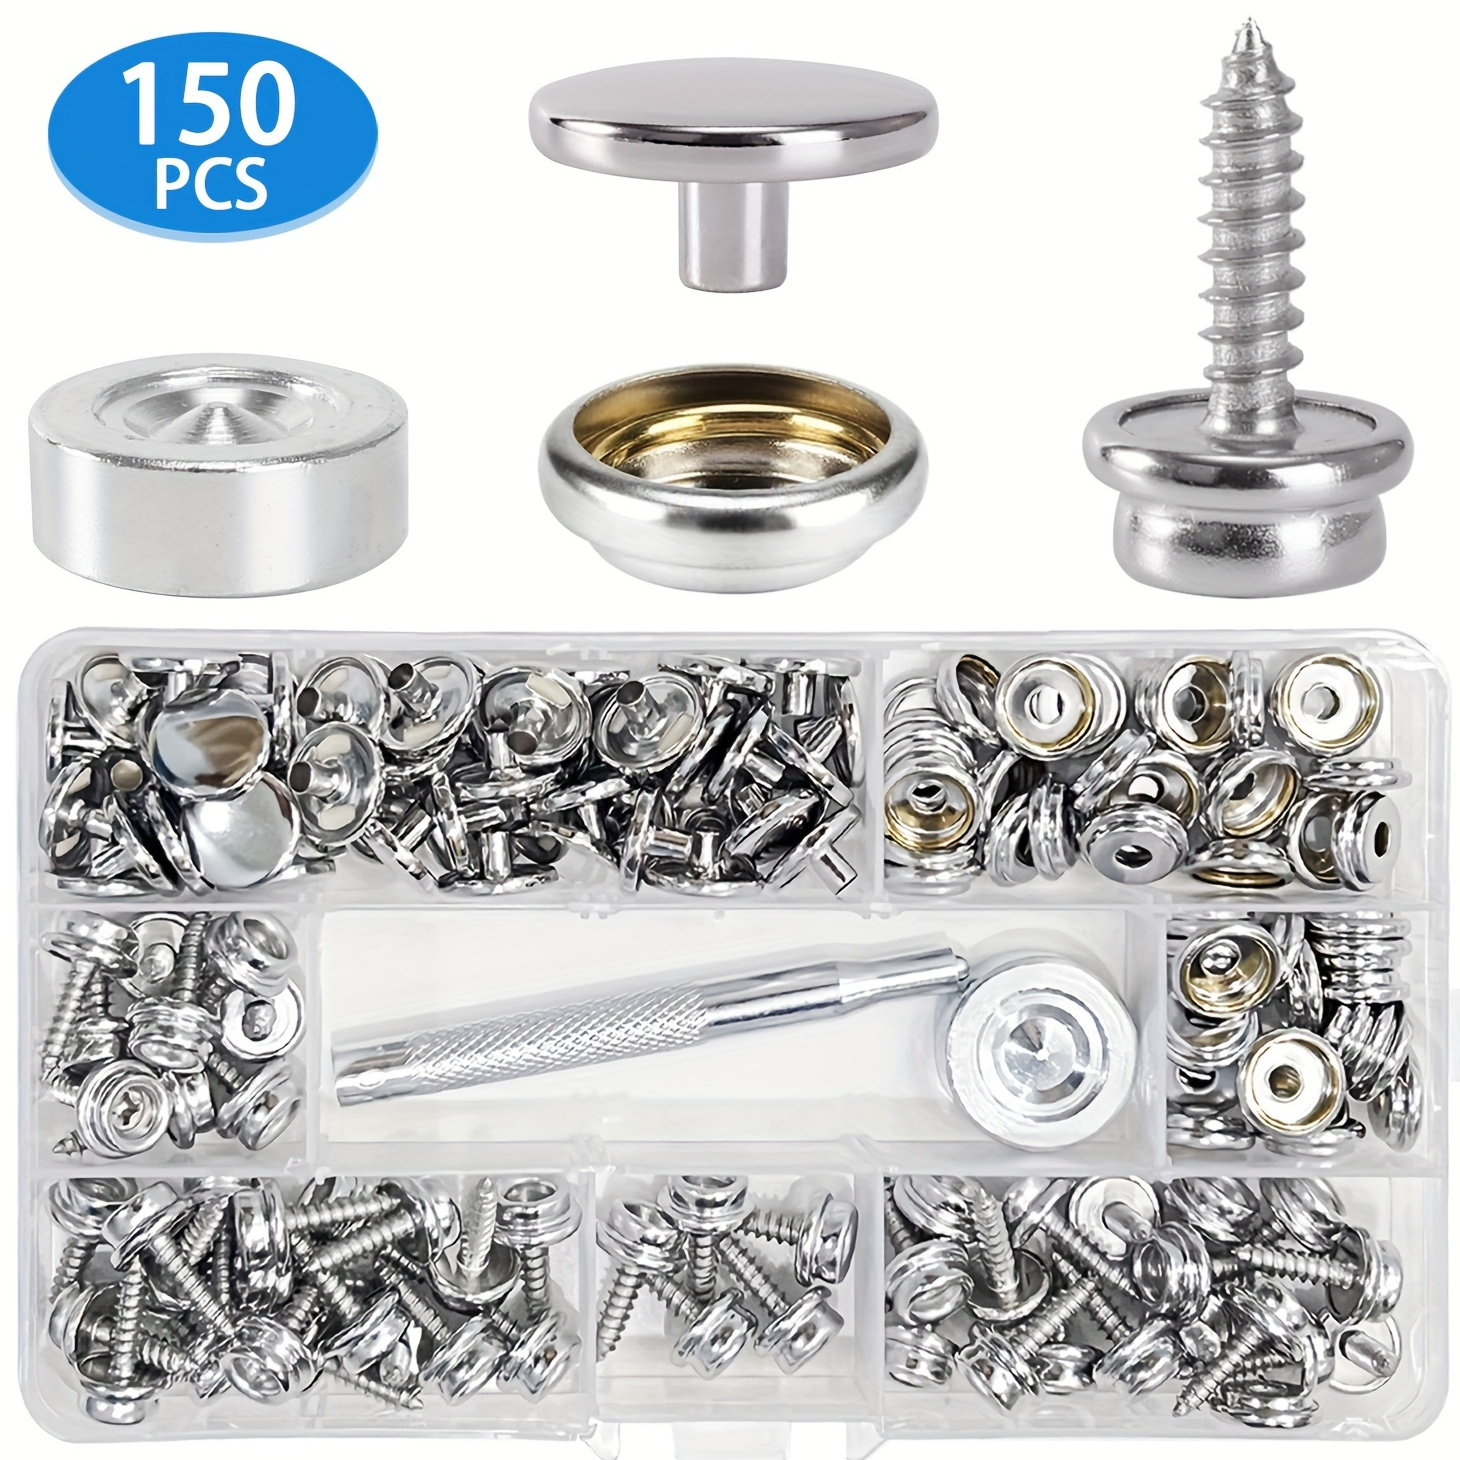 

150pcs/set Marine Canvas Snap Kit With 2pcs Fixing Tools For Boat Cover Furniture Metal Screw Snaps Marine Grade 3/8" Sleeve Rust Resistant Copper Cap And Stainless Steel Screw Snaps